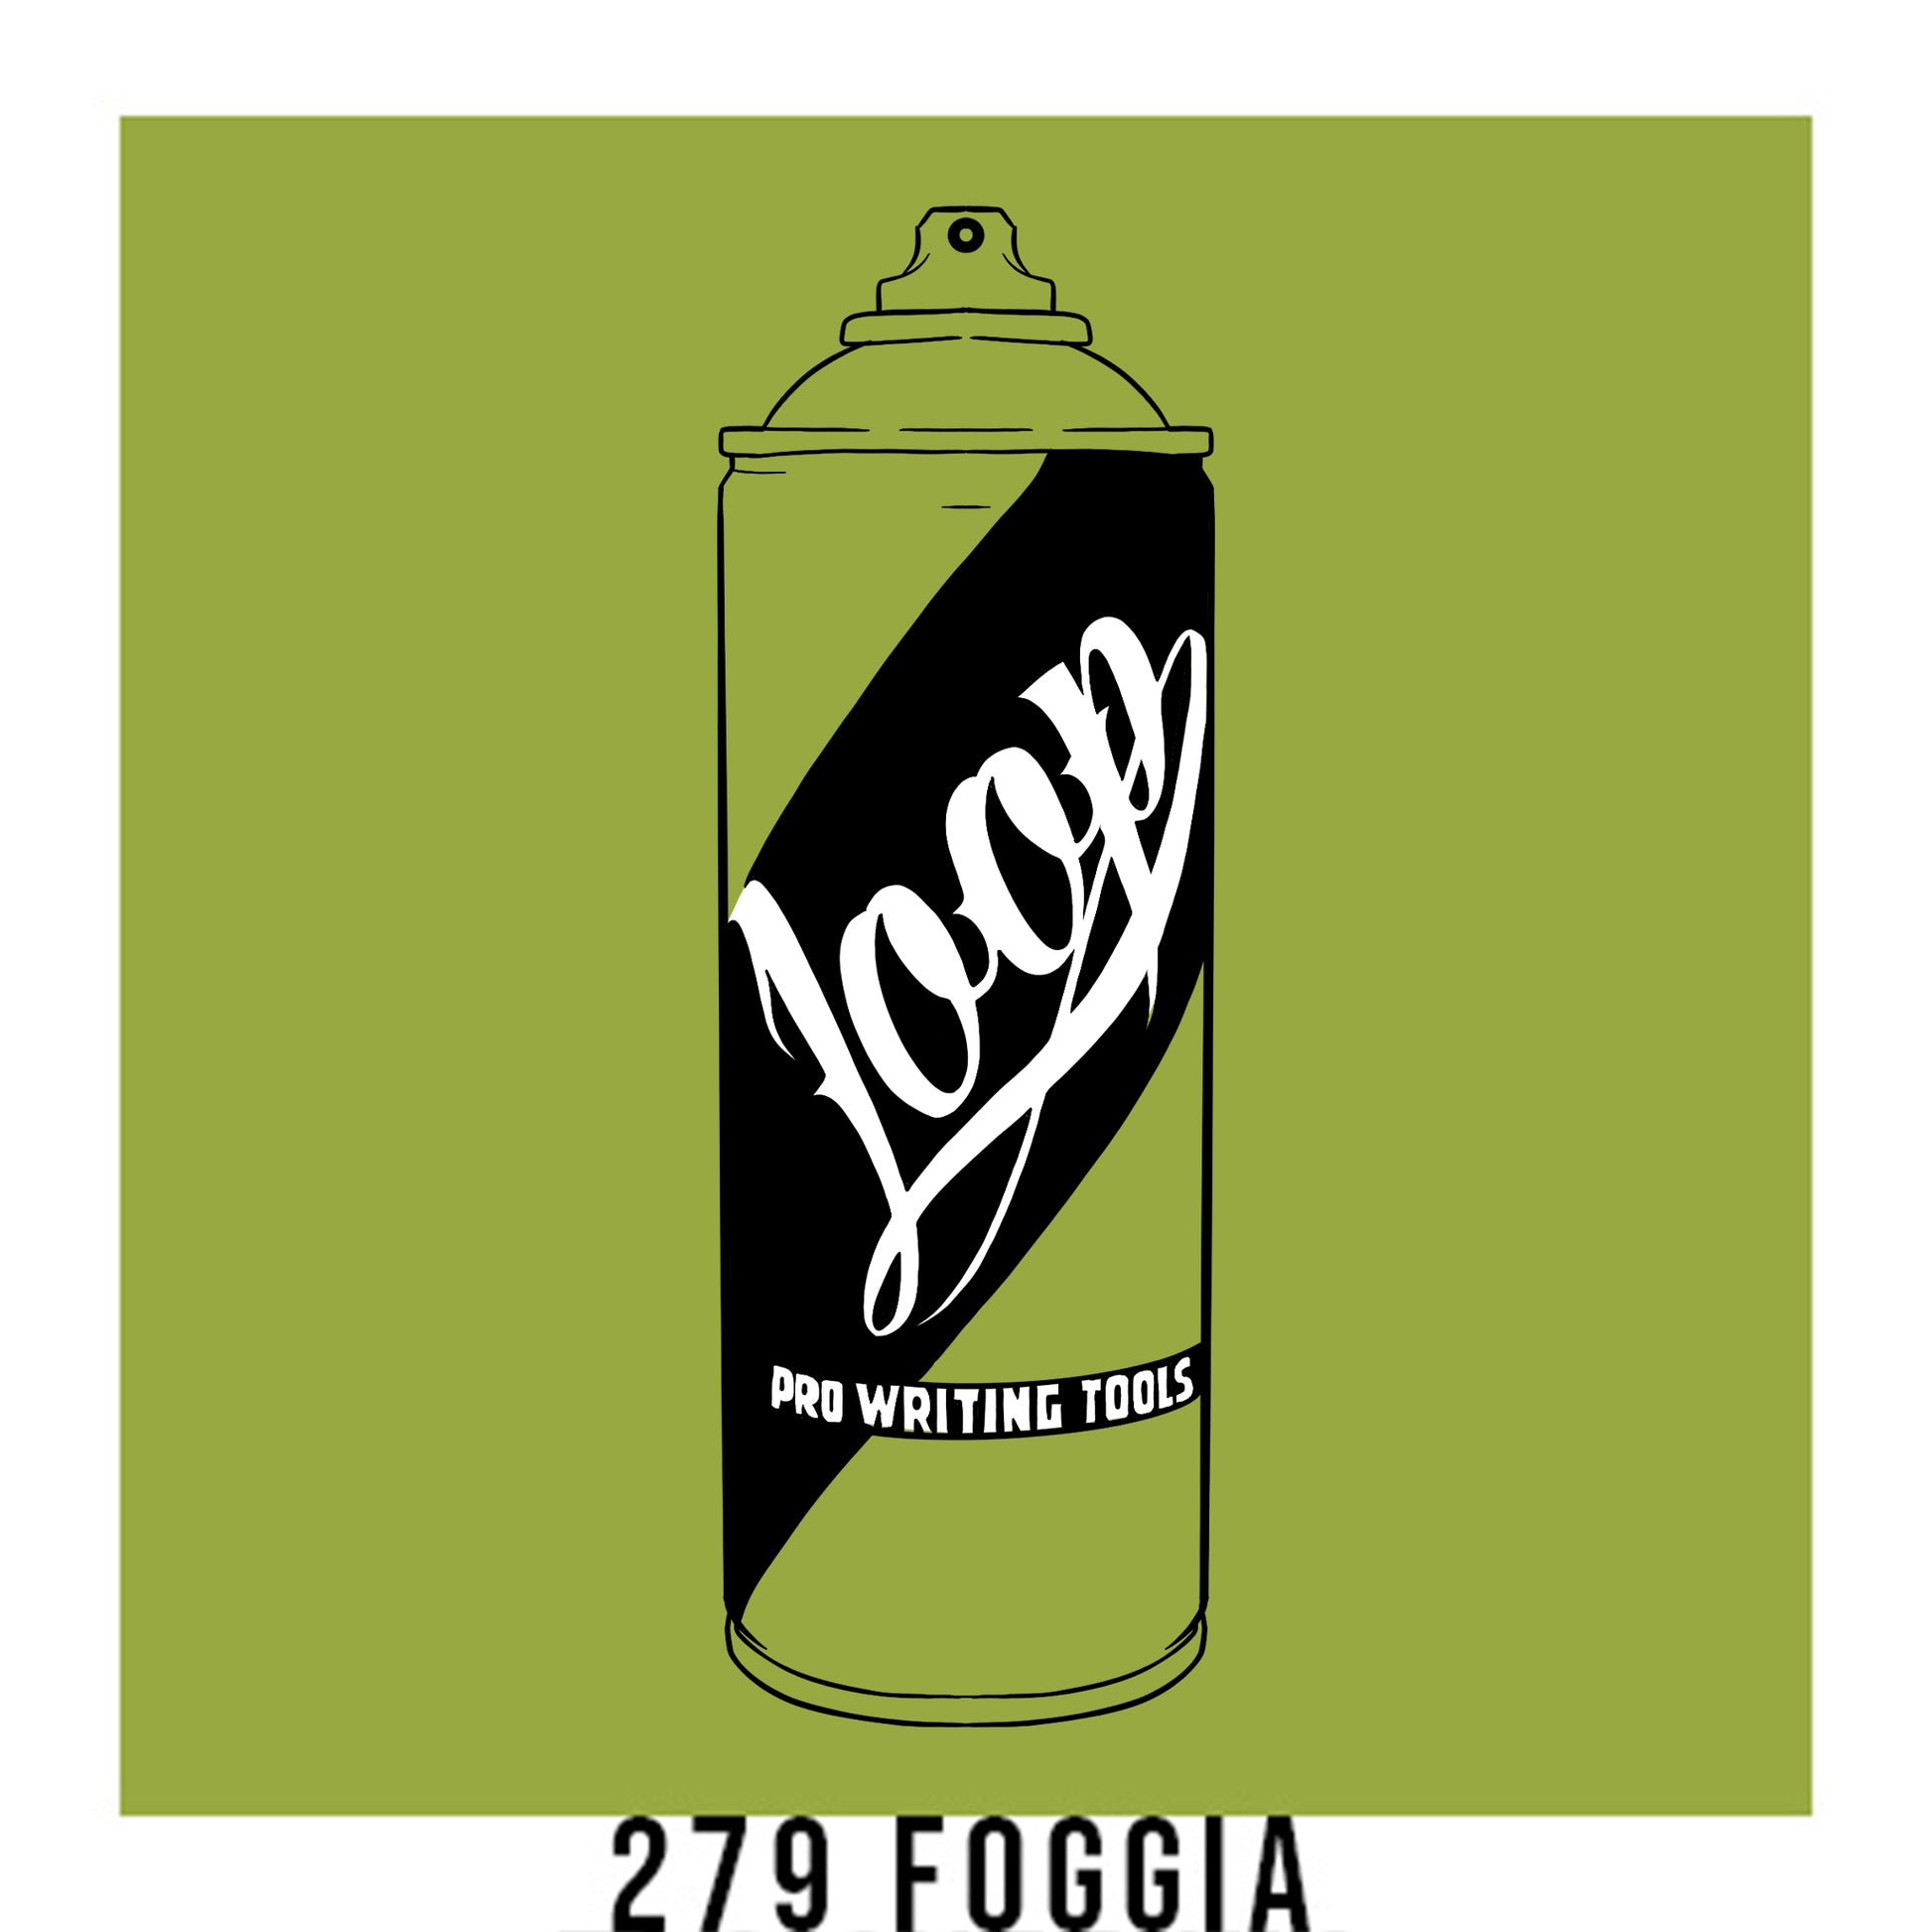 A black outline drawing of a light olive spray paint can with the word "Loop" written on the face in script. The background is a color swatch of the same light olive with a white border with the words "279 Foggia" at the bottom.